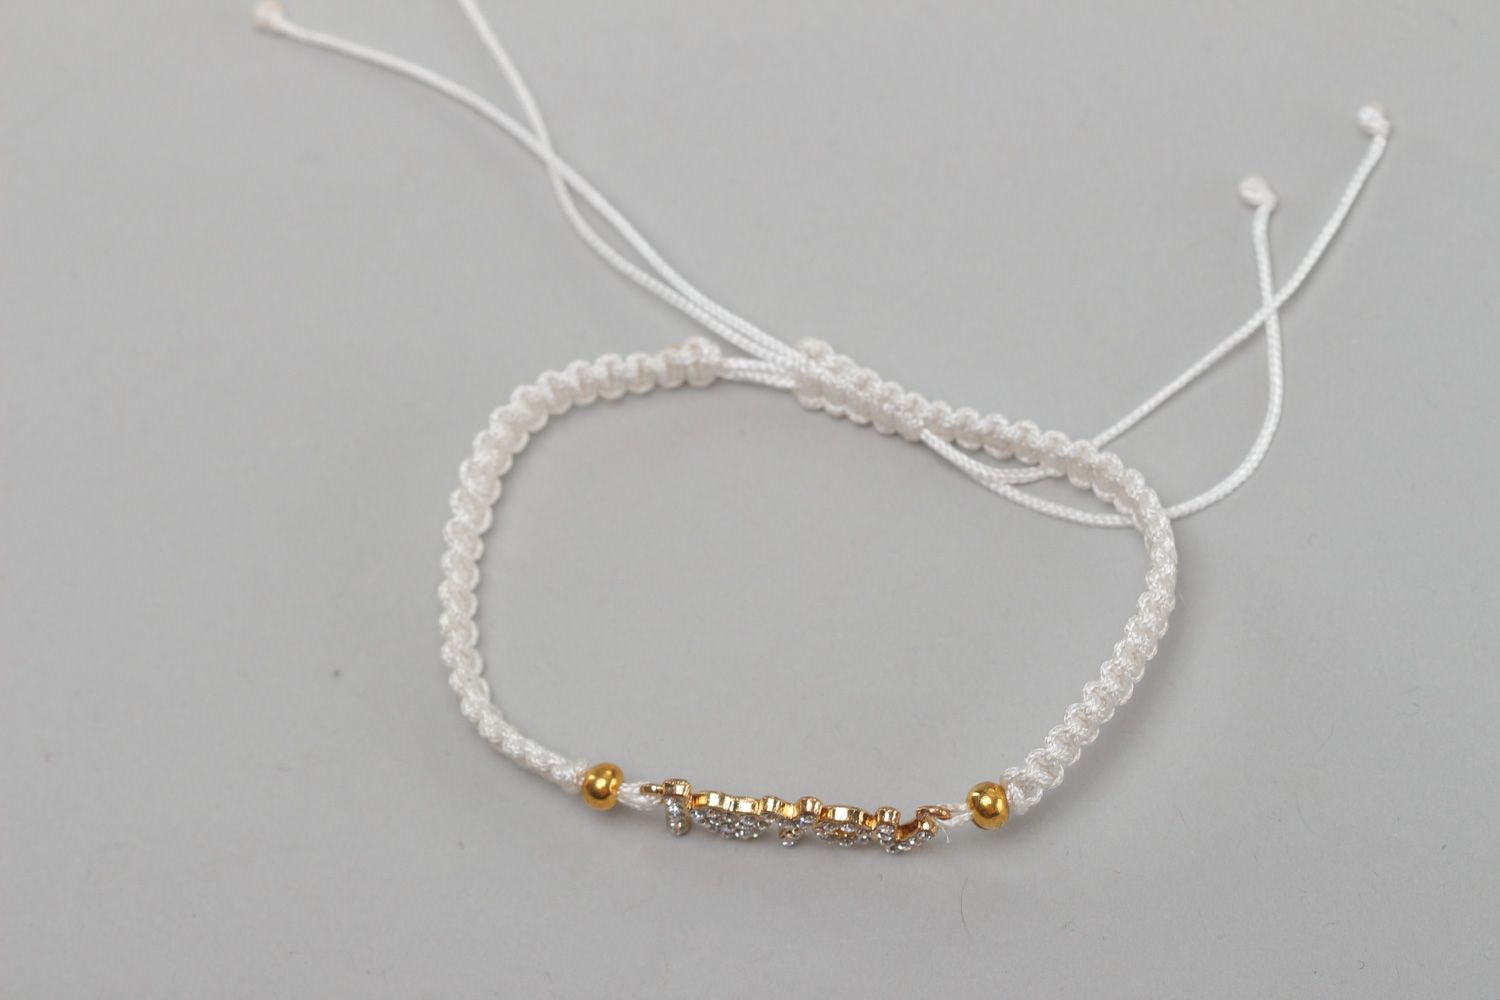 Handmade friendship bracelet woven of white waxed cord with lettering I love you  photo 2